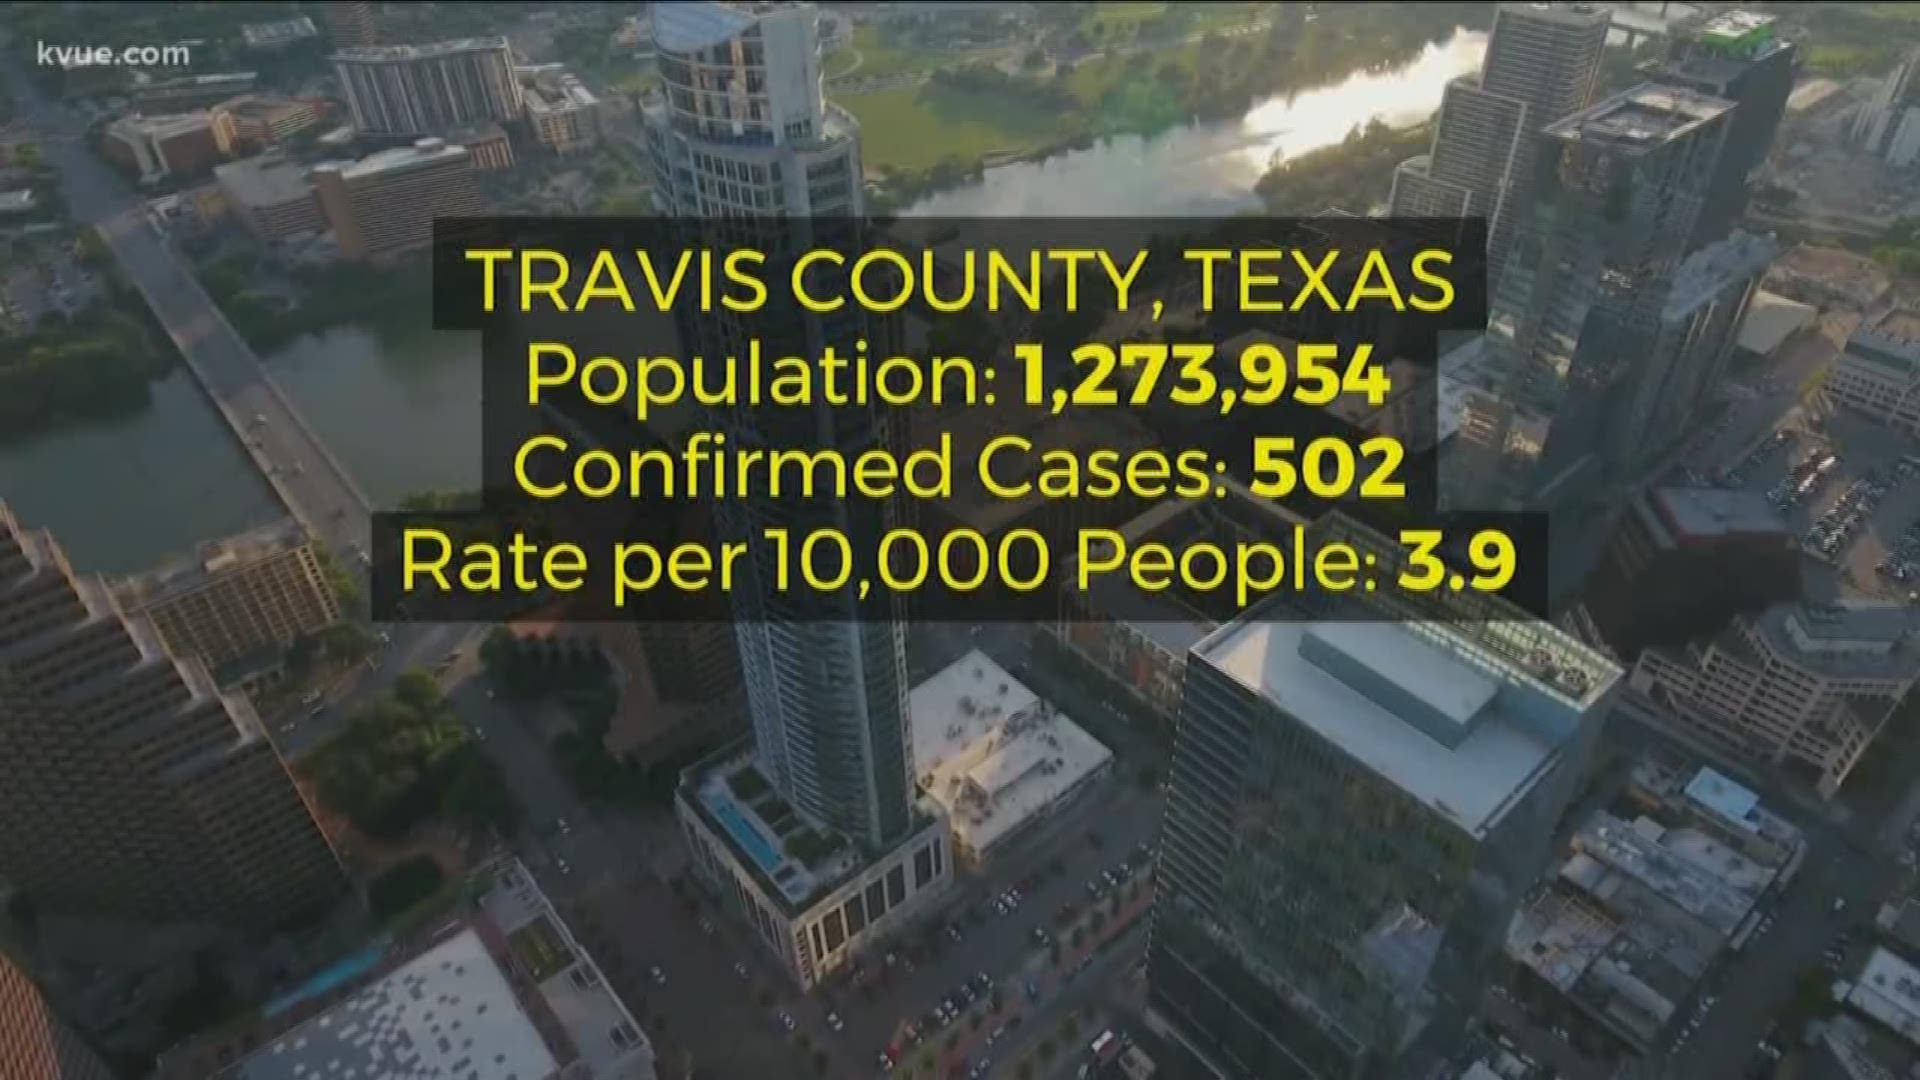 Doctors have confirmed more cases of COVID-19 in more populated Texas counties. But those numbers can be deceiving. Bob Buckalew breaks them down.